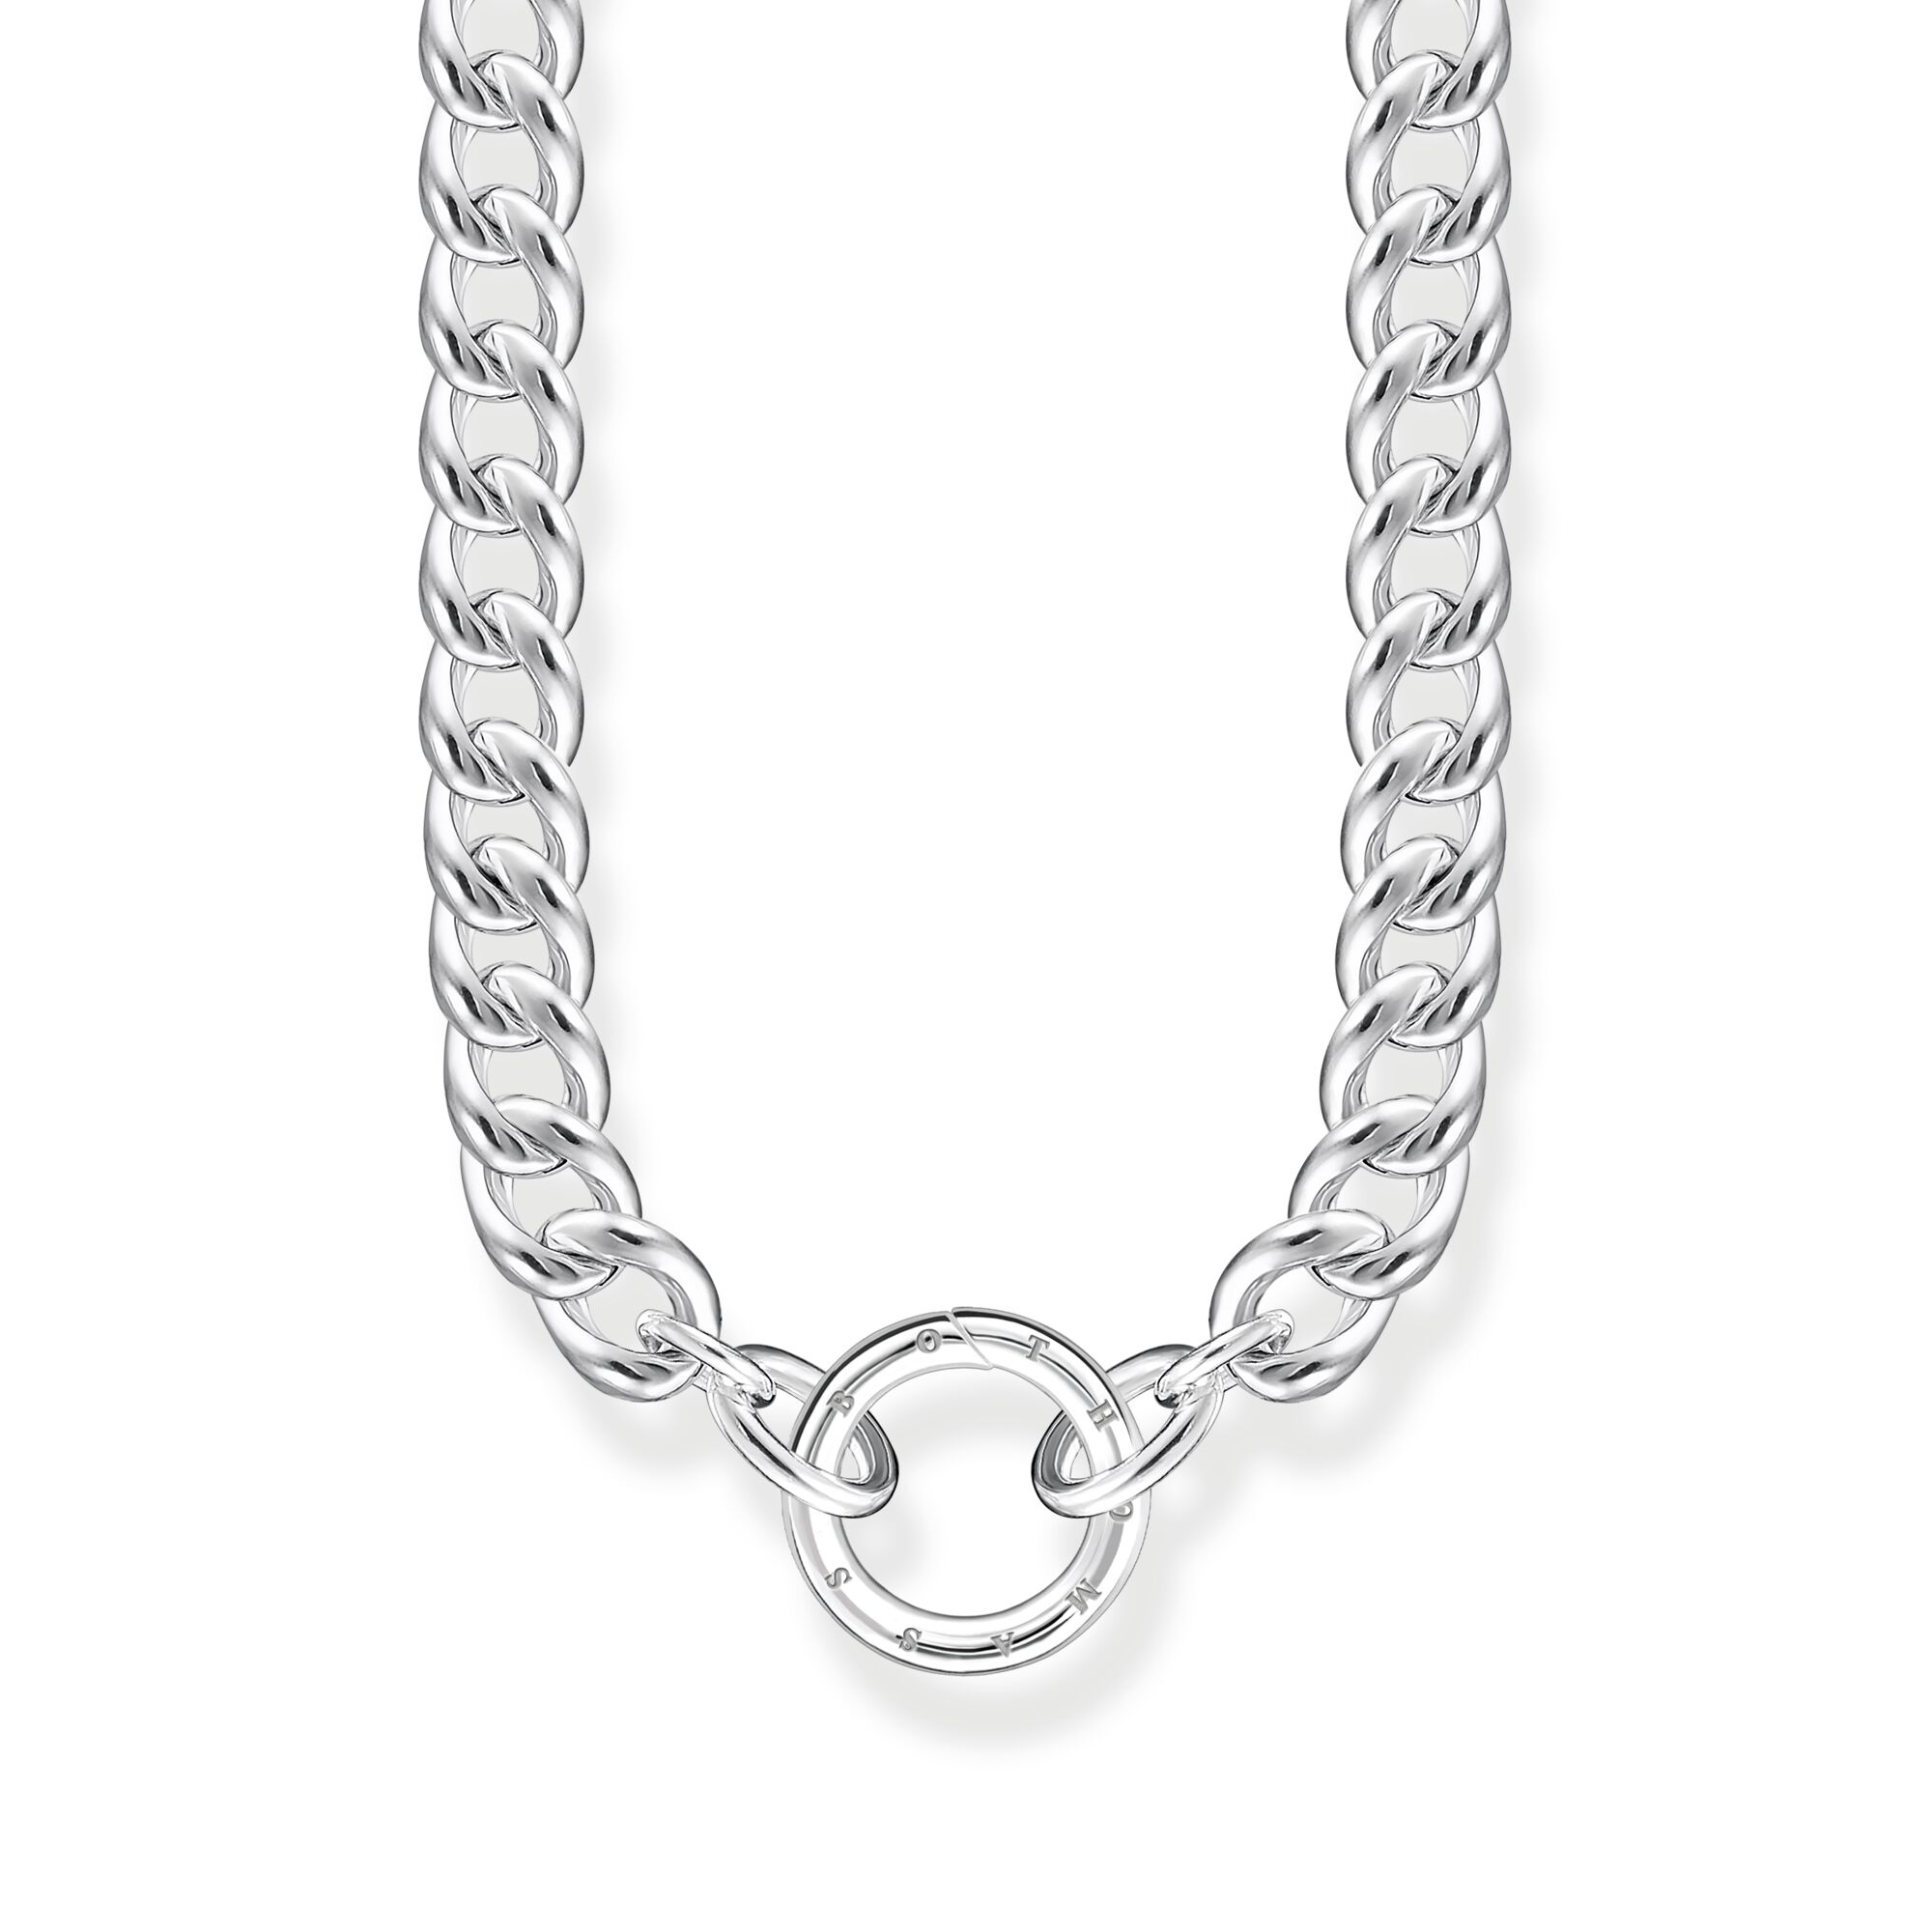 Thomas Sabo Silver Cubic Zirconia Cross Necklace | 0126456 | Beaverbrooks  the Jewellers